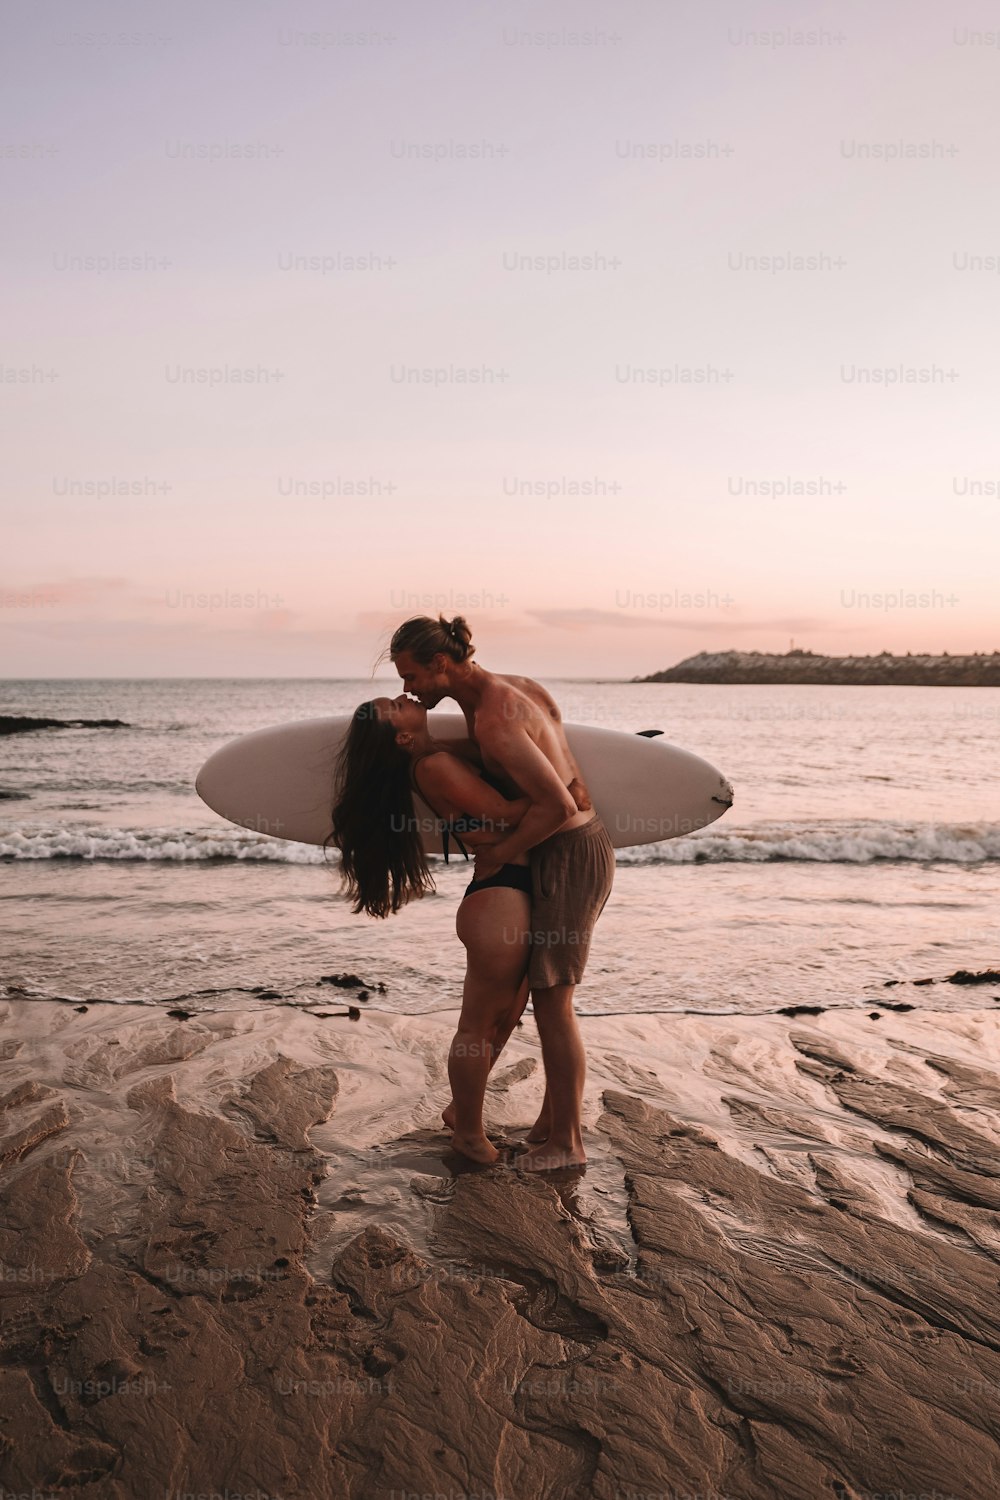 a man and woman kissing on the beach with a surfboard